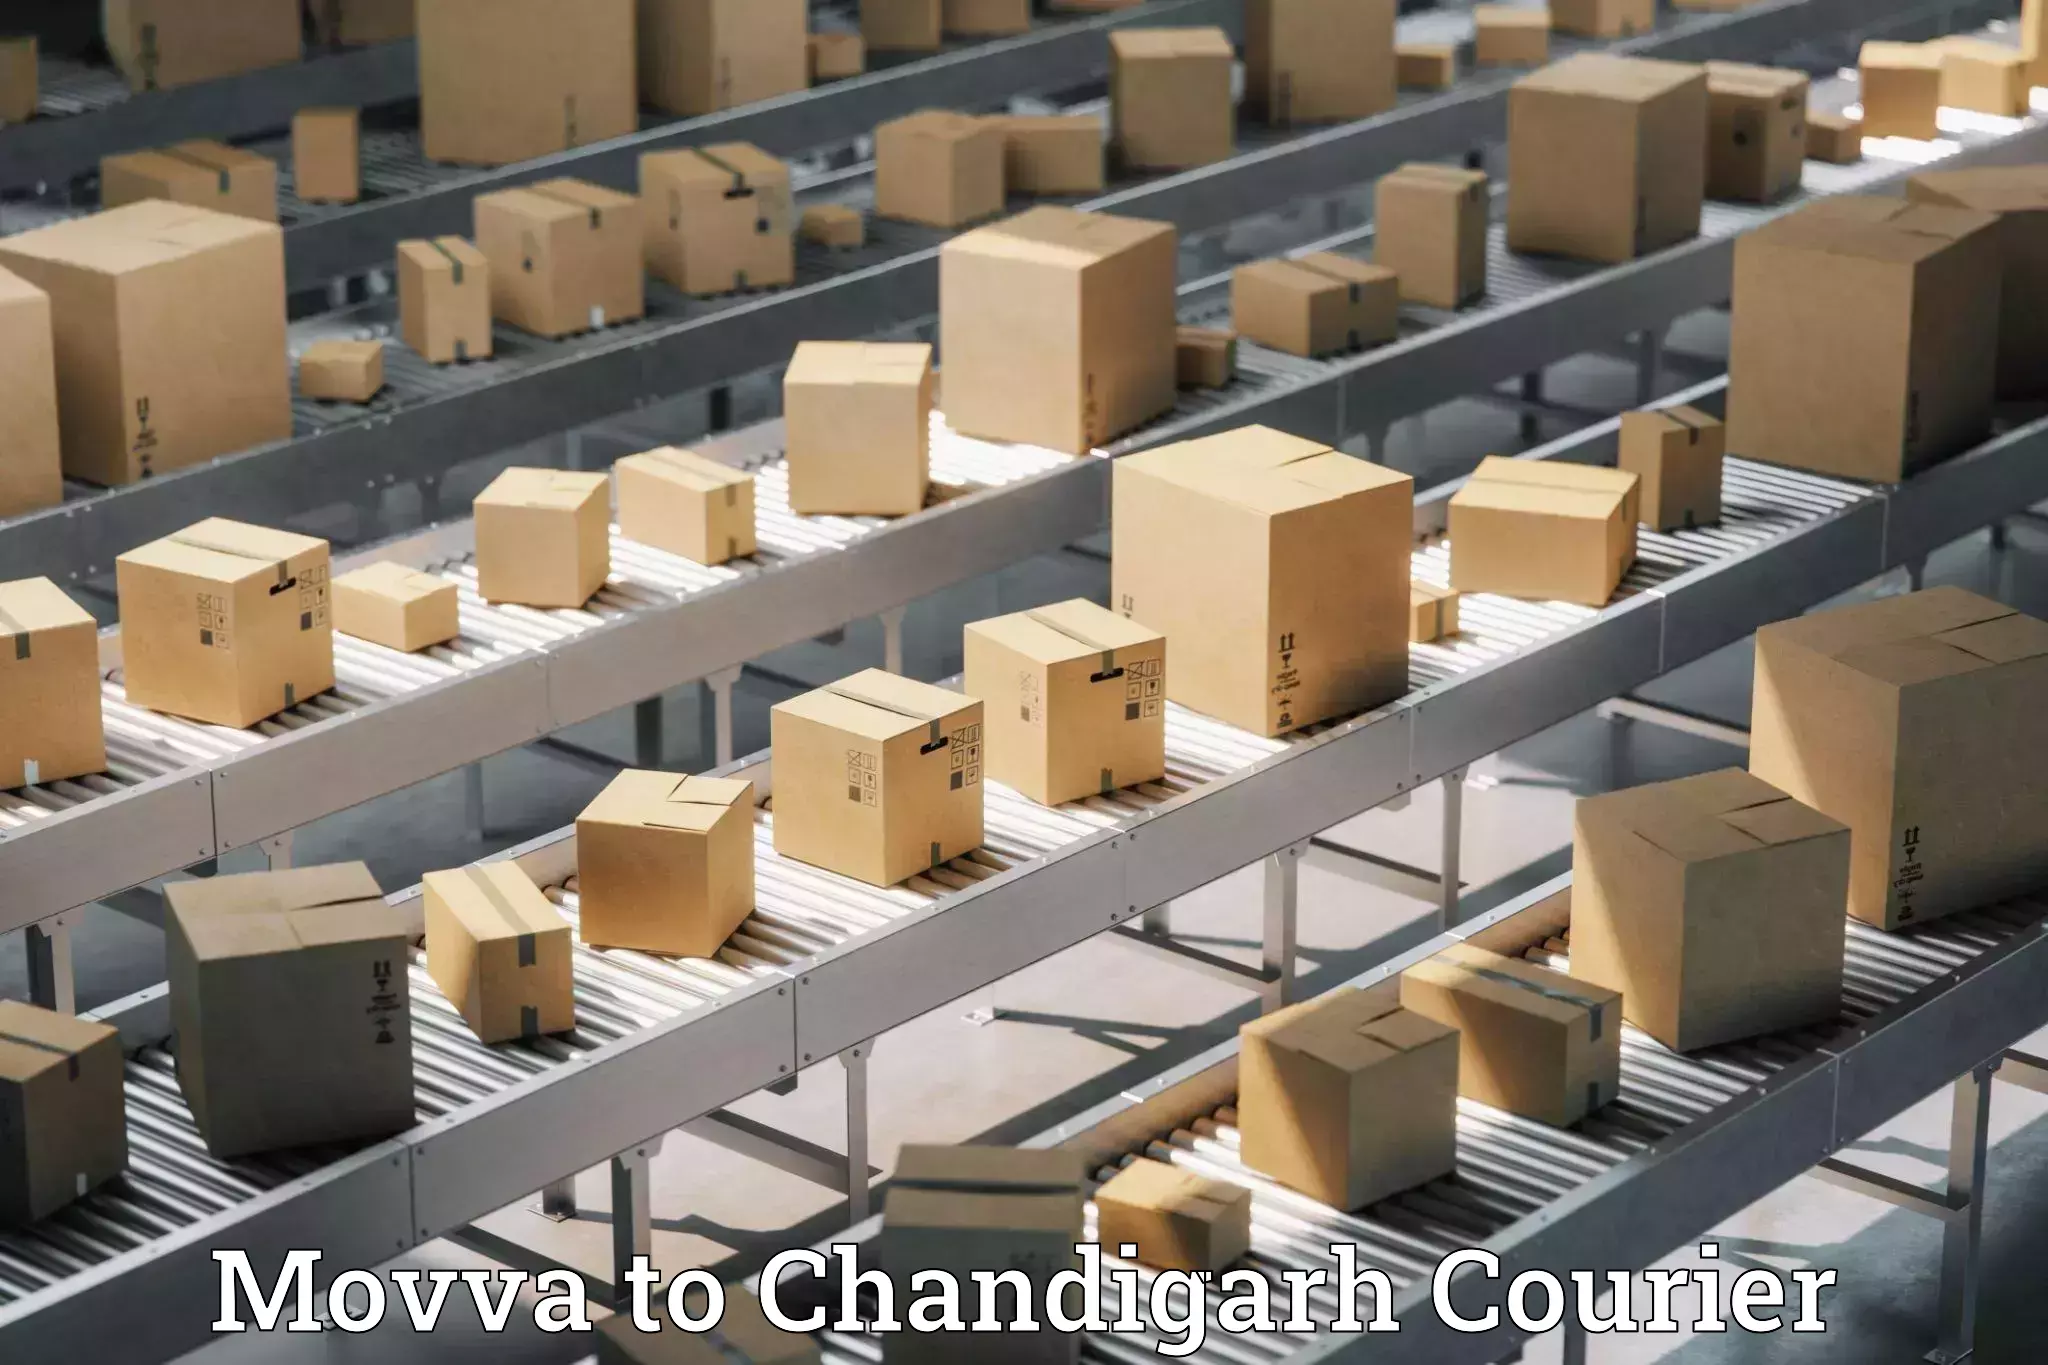 Cash on delivery service Movva to Chandigarh